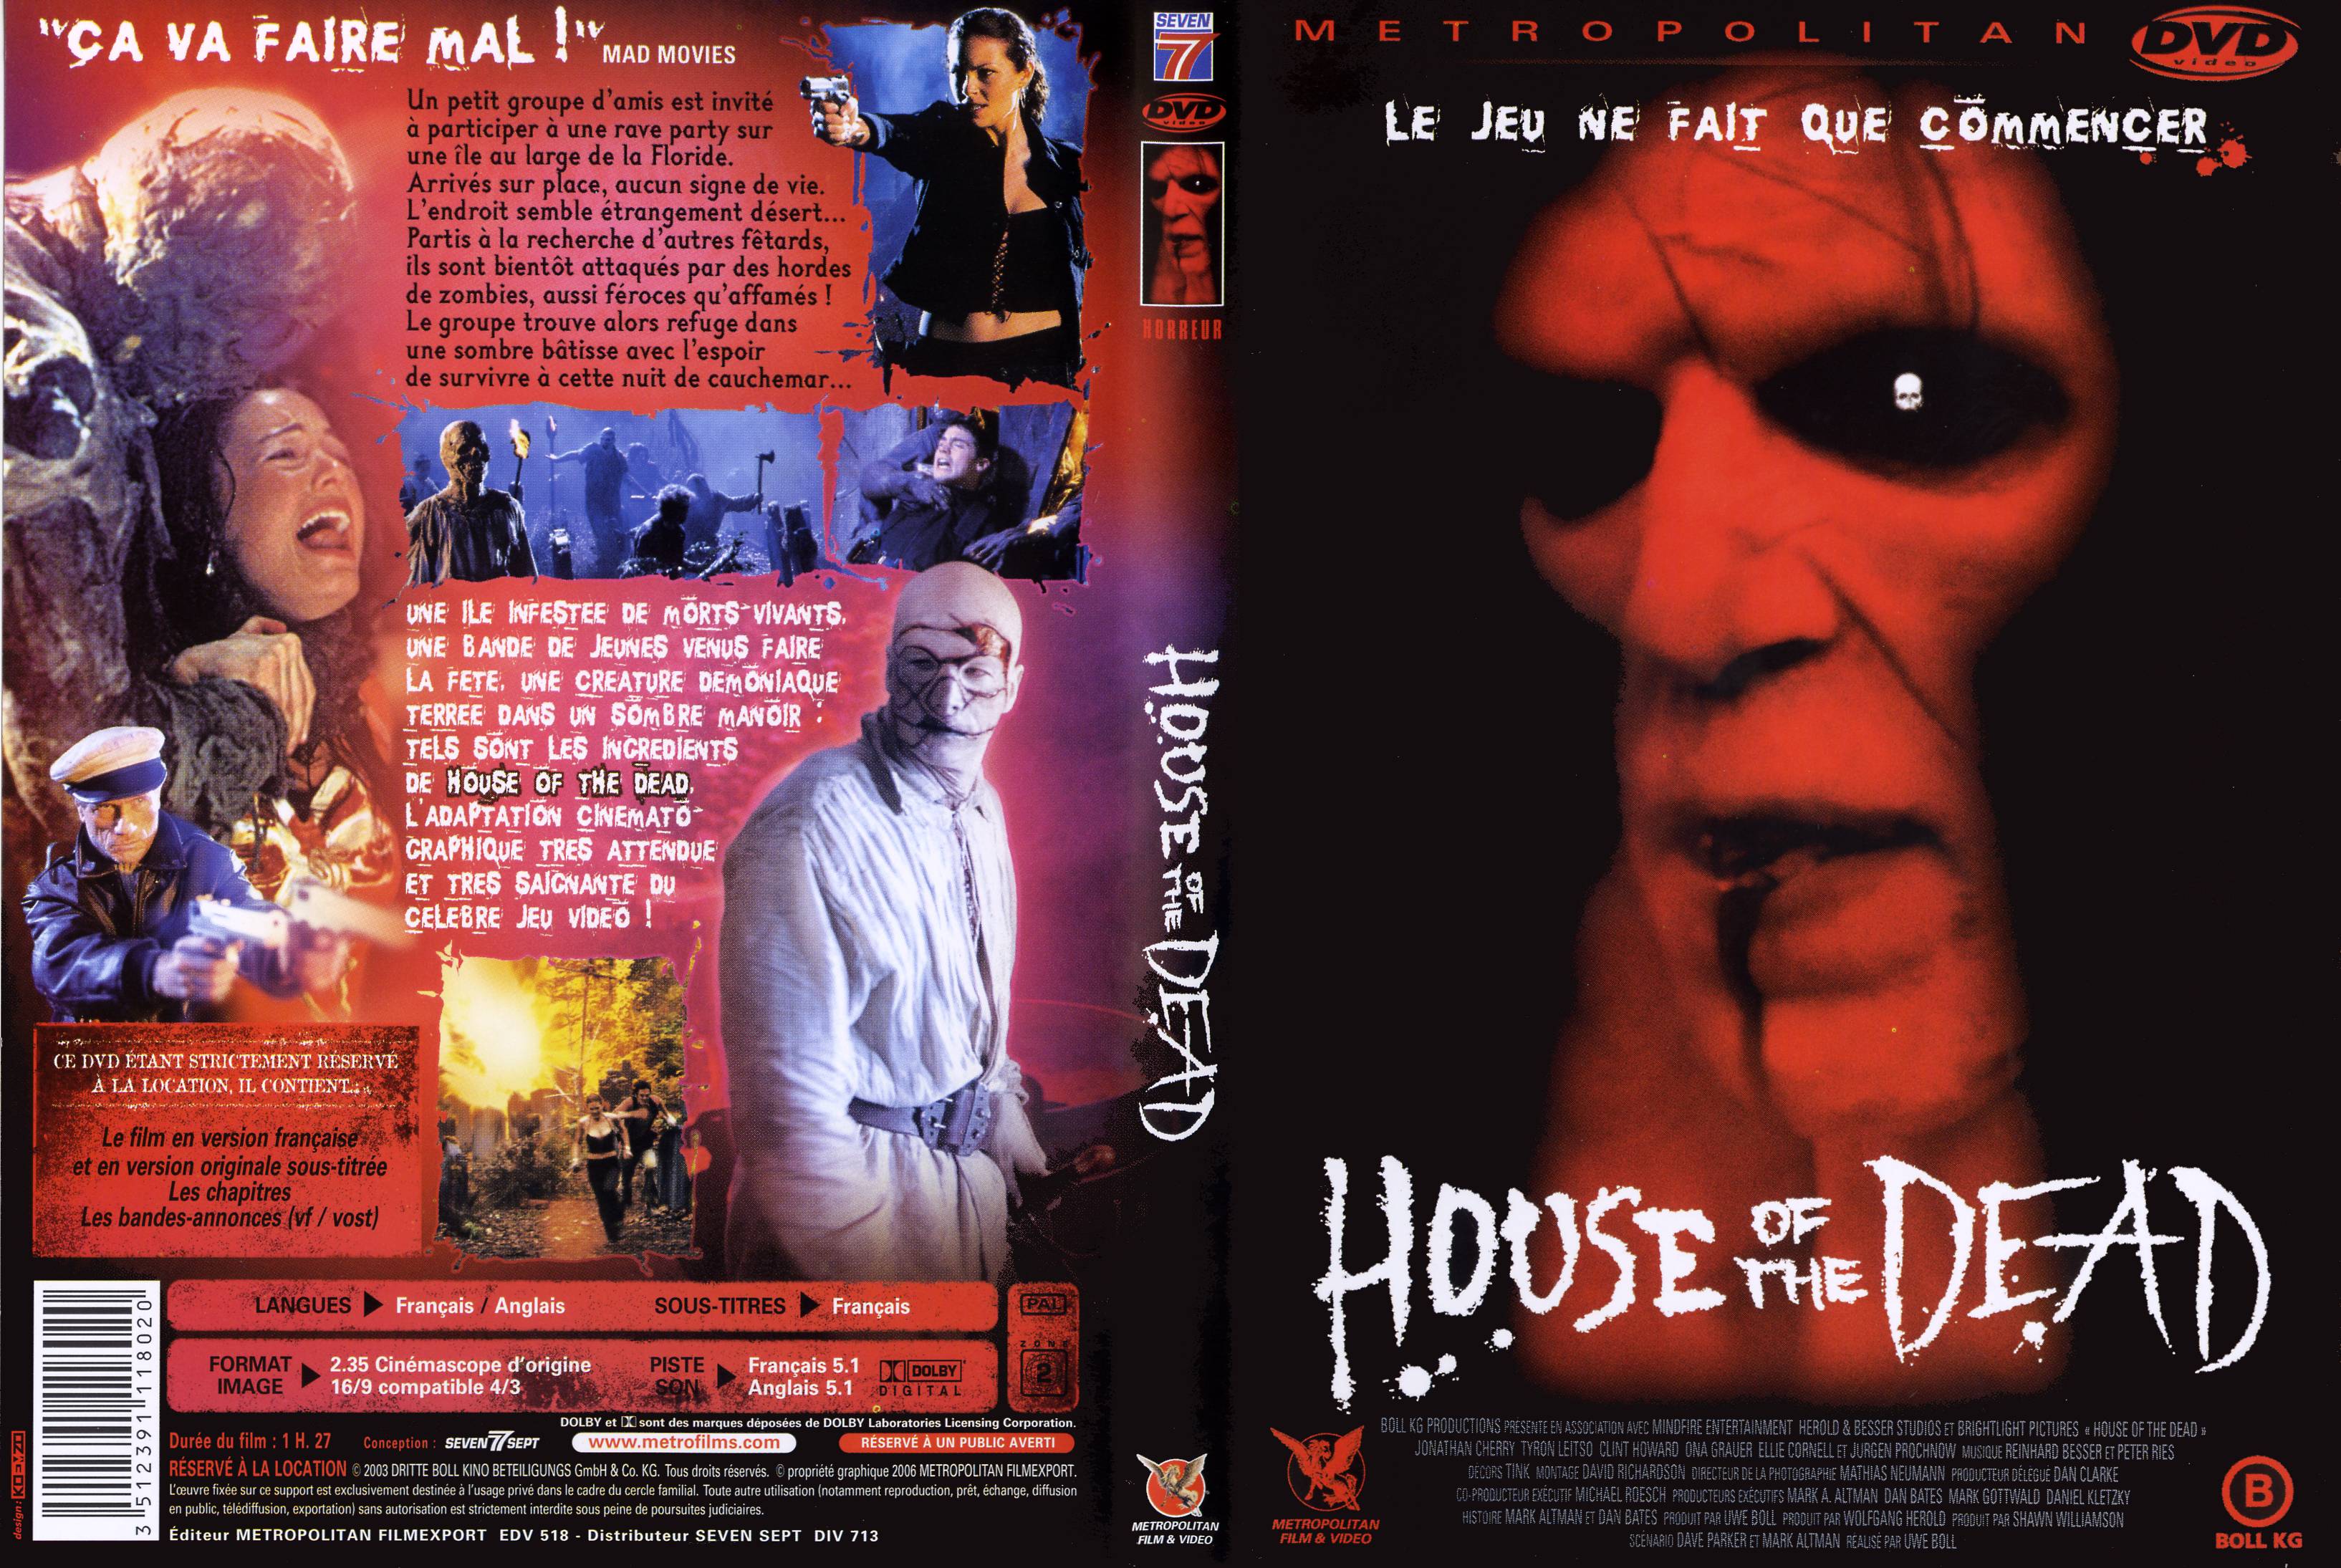 Jaquette DVD House of the dead v2